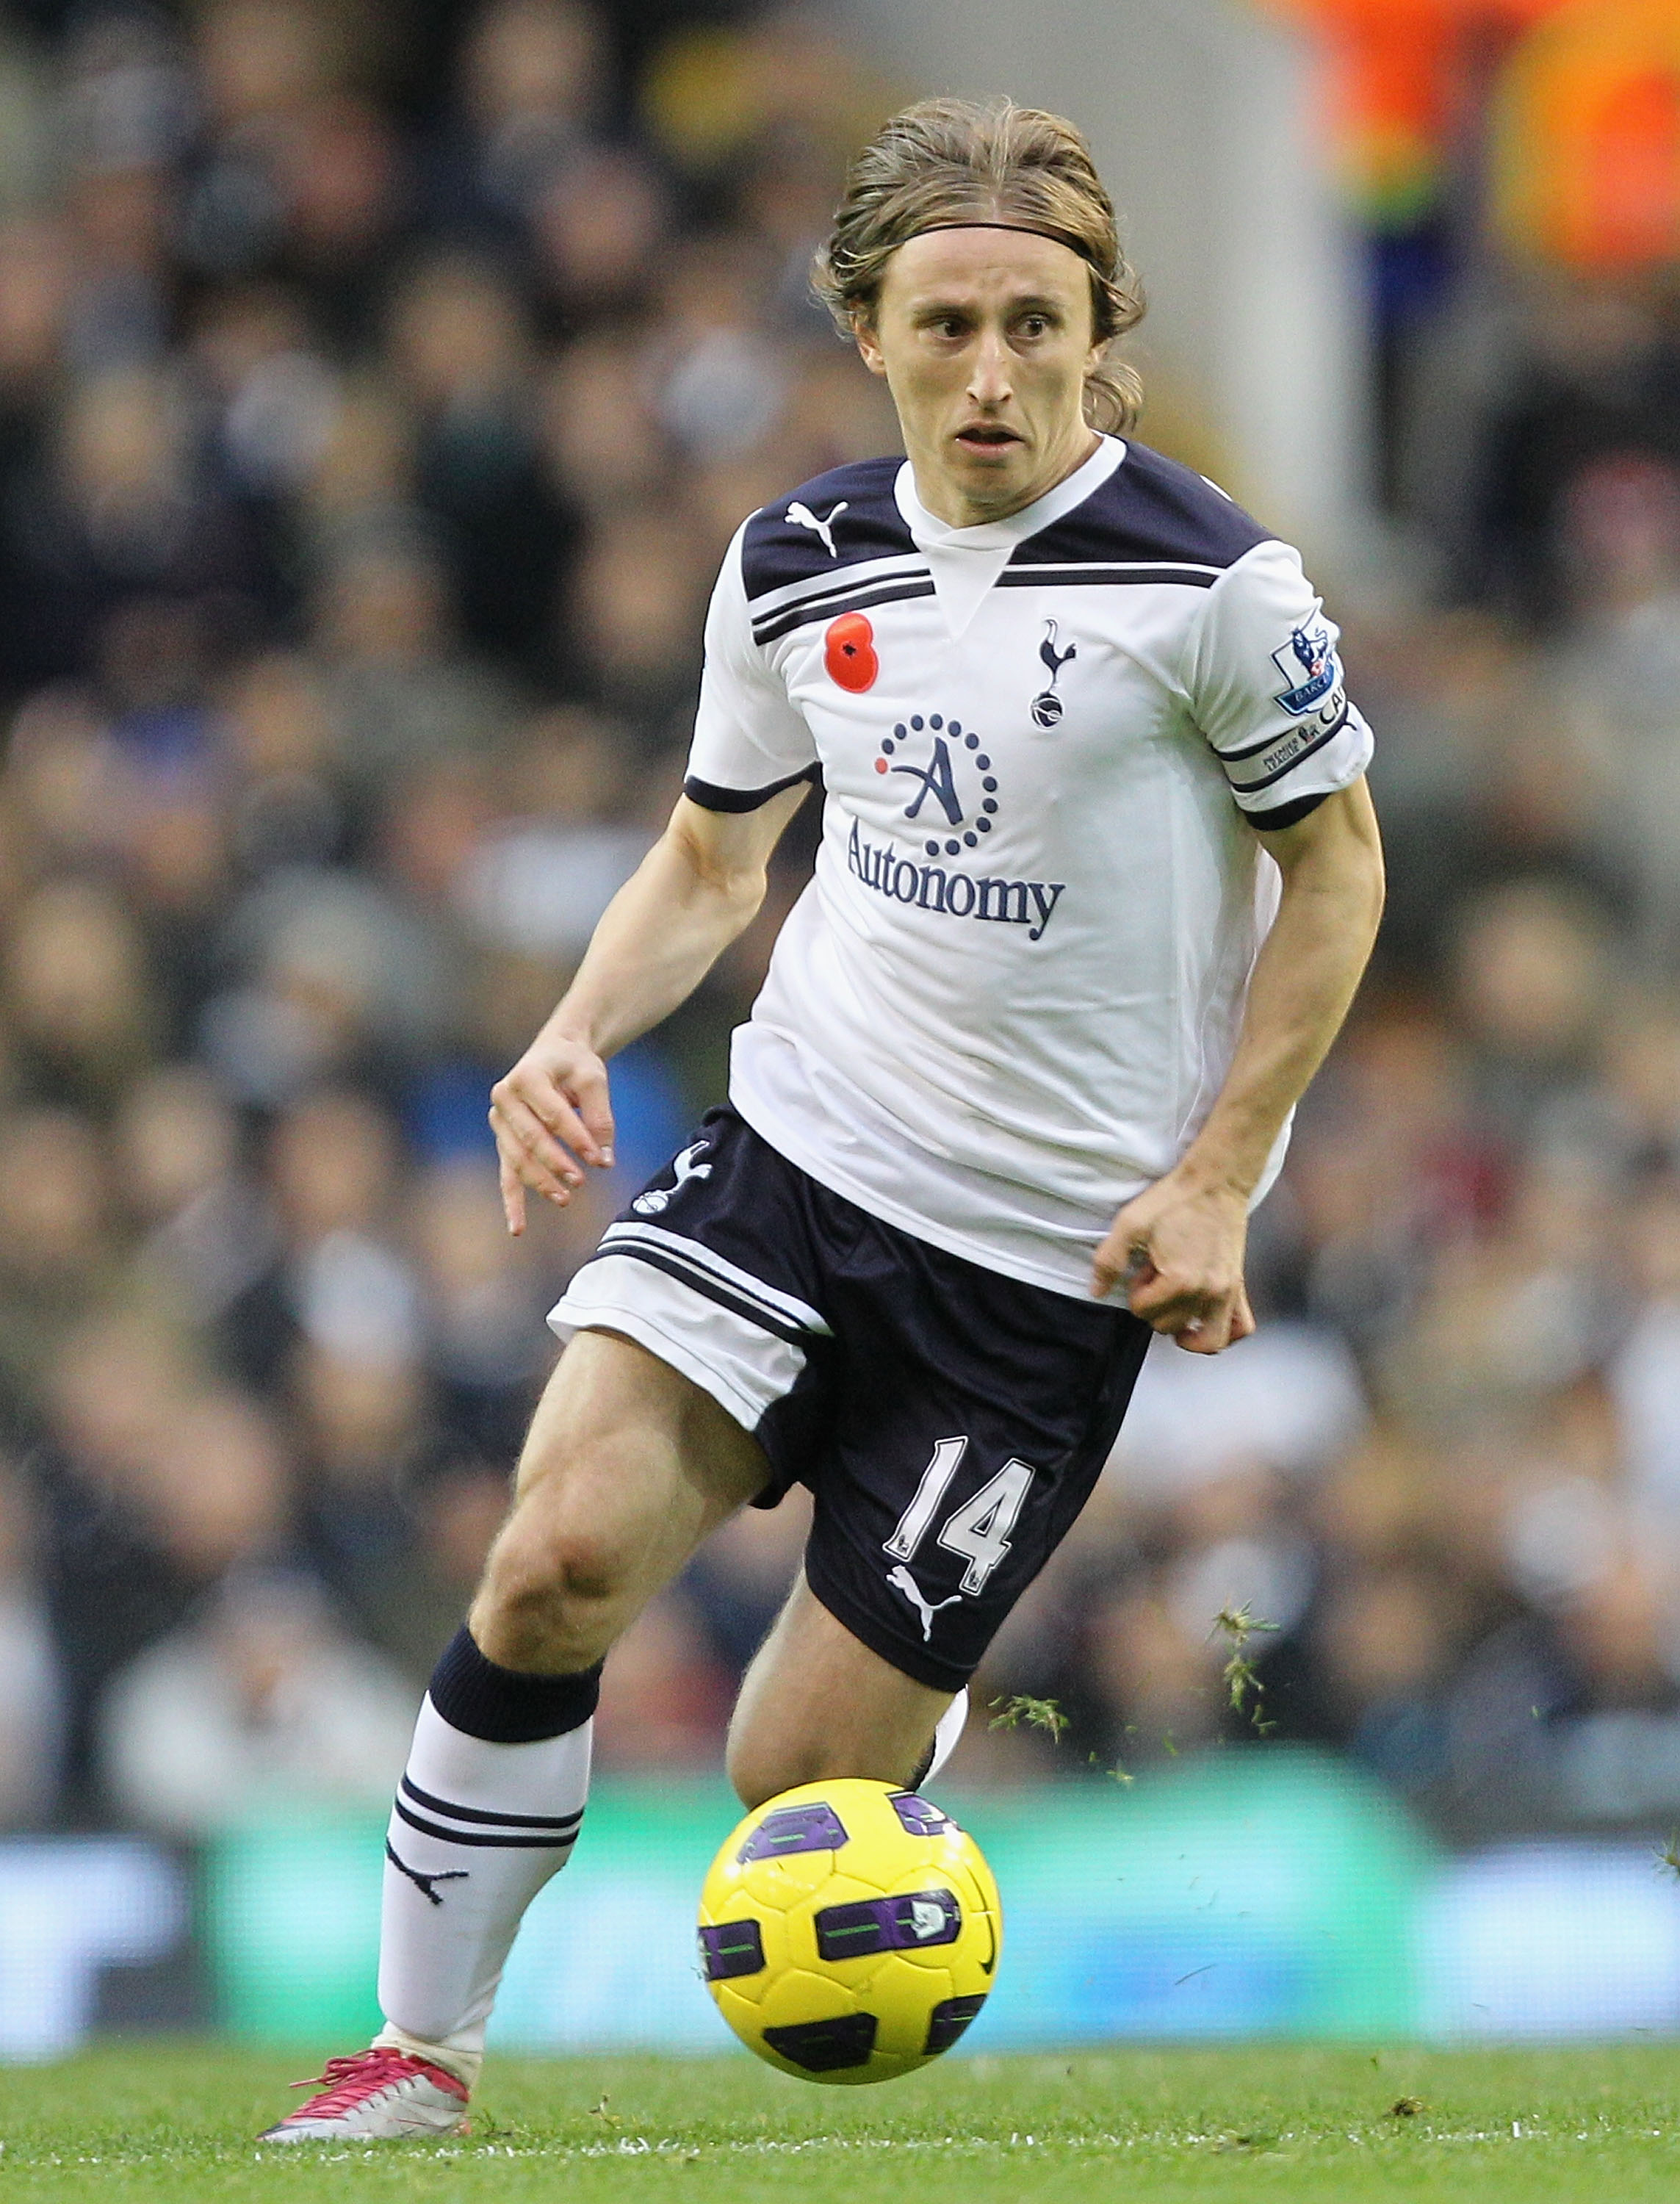 LONDON, ENGLAND - NOVEMBER 13:  Luka Modric of Tottenham in action during the Barclays Premier League match between Tottenham Hotspur and Blackburn Rovers at White Hart Lane on November 13, 2010 in London, England.  (Photo by Hamish Blair/Getty Images)